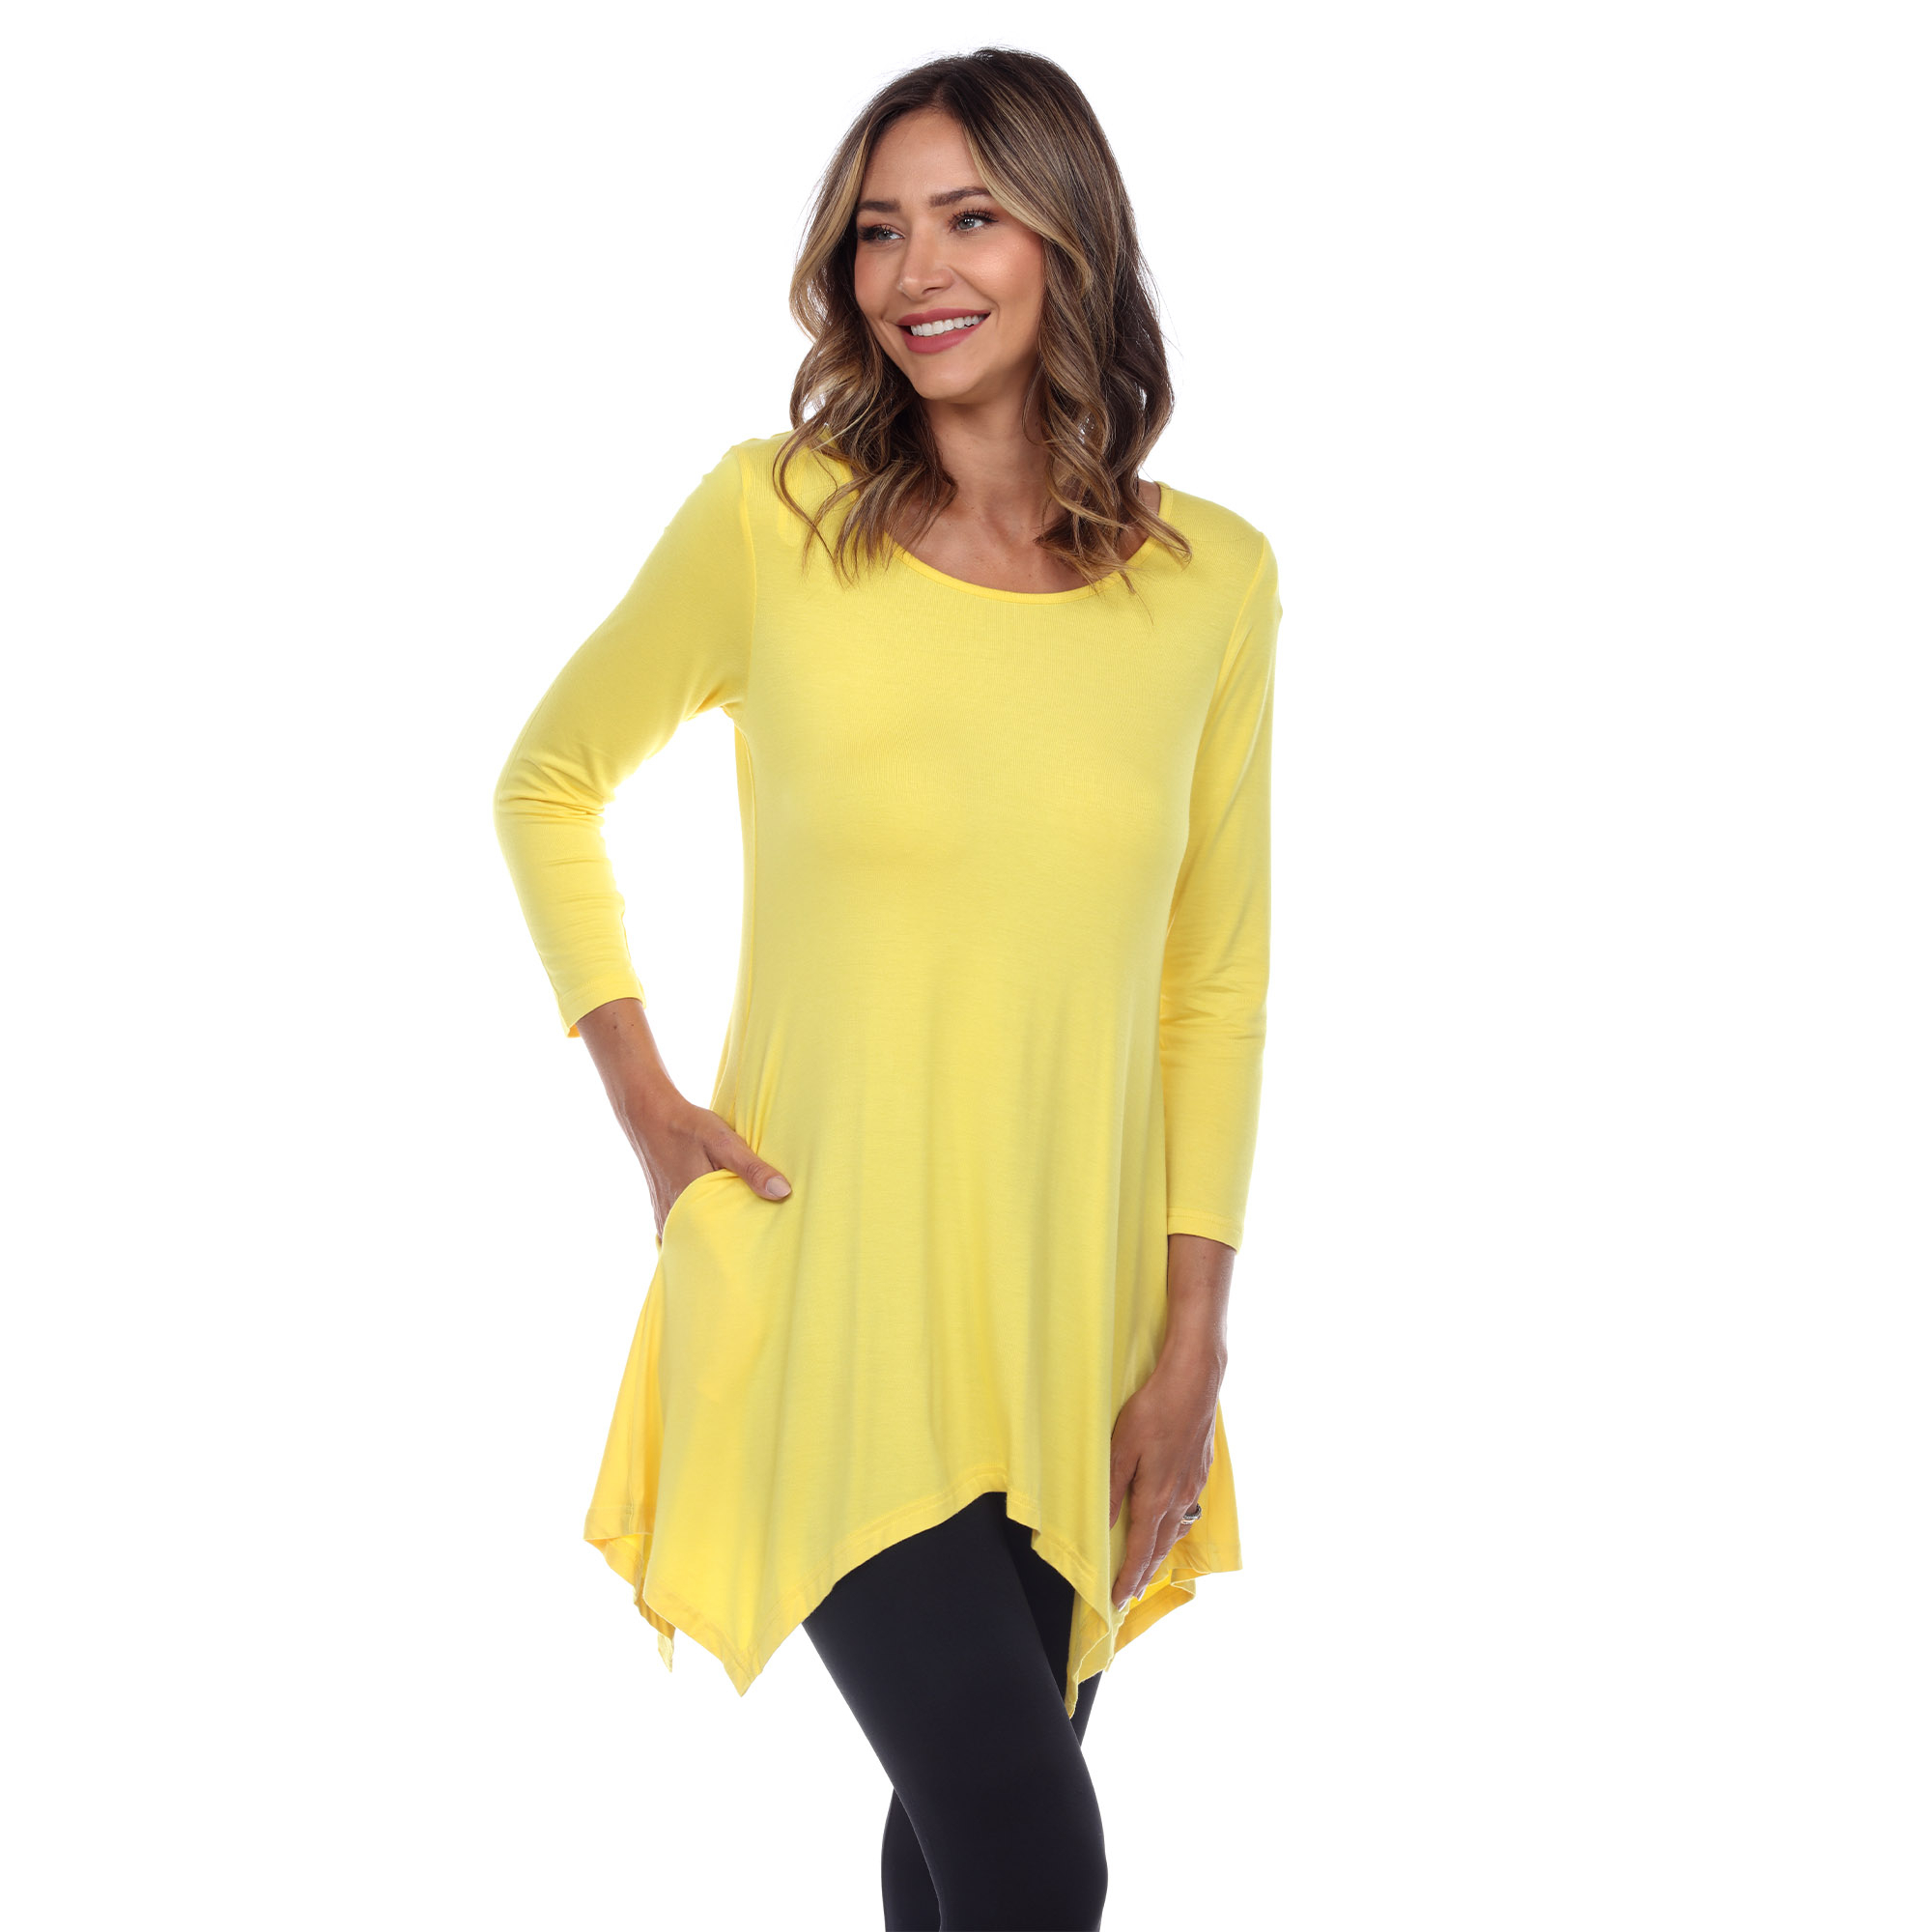 White Mark Women's Quarter Sleeve Tunic Top With Pockets - Yellow, 3X